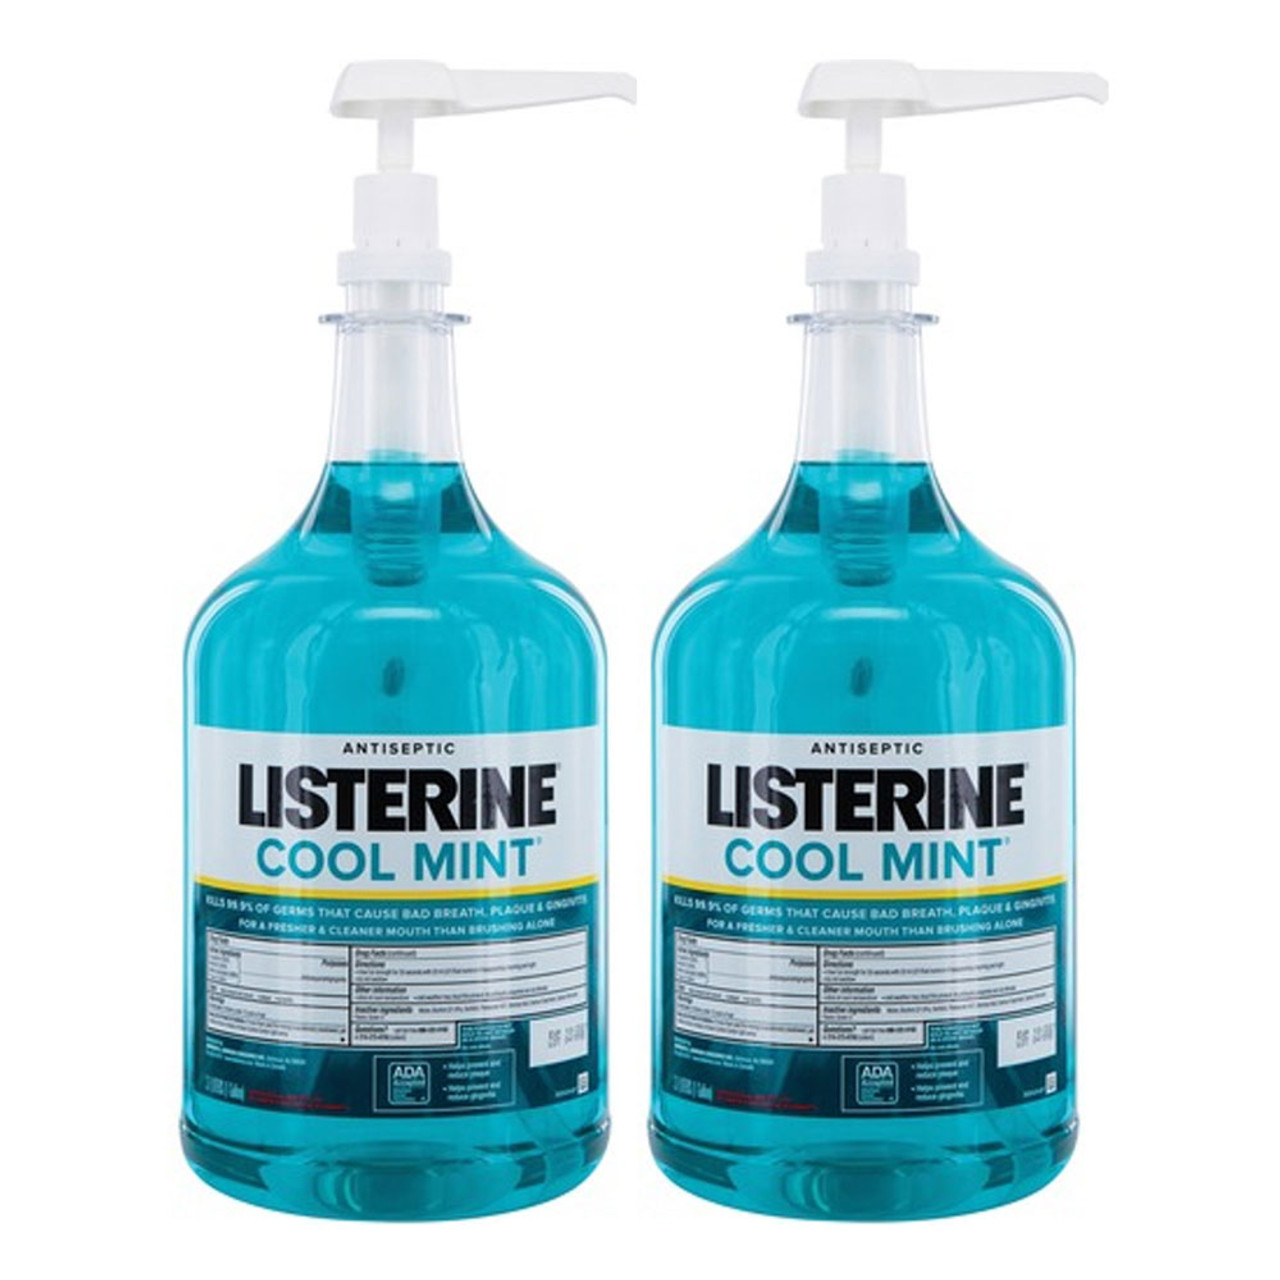 Listerine Cool Mint Antiseptic Mouthwash/Mouth Rinse for Bad